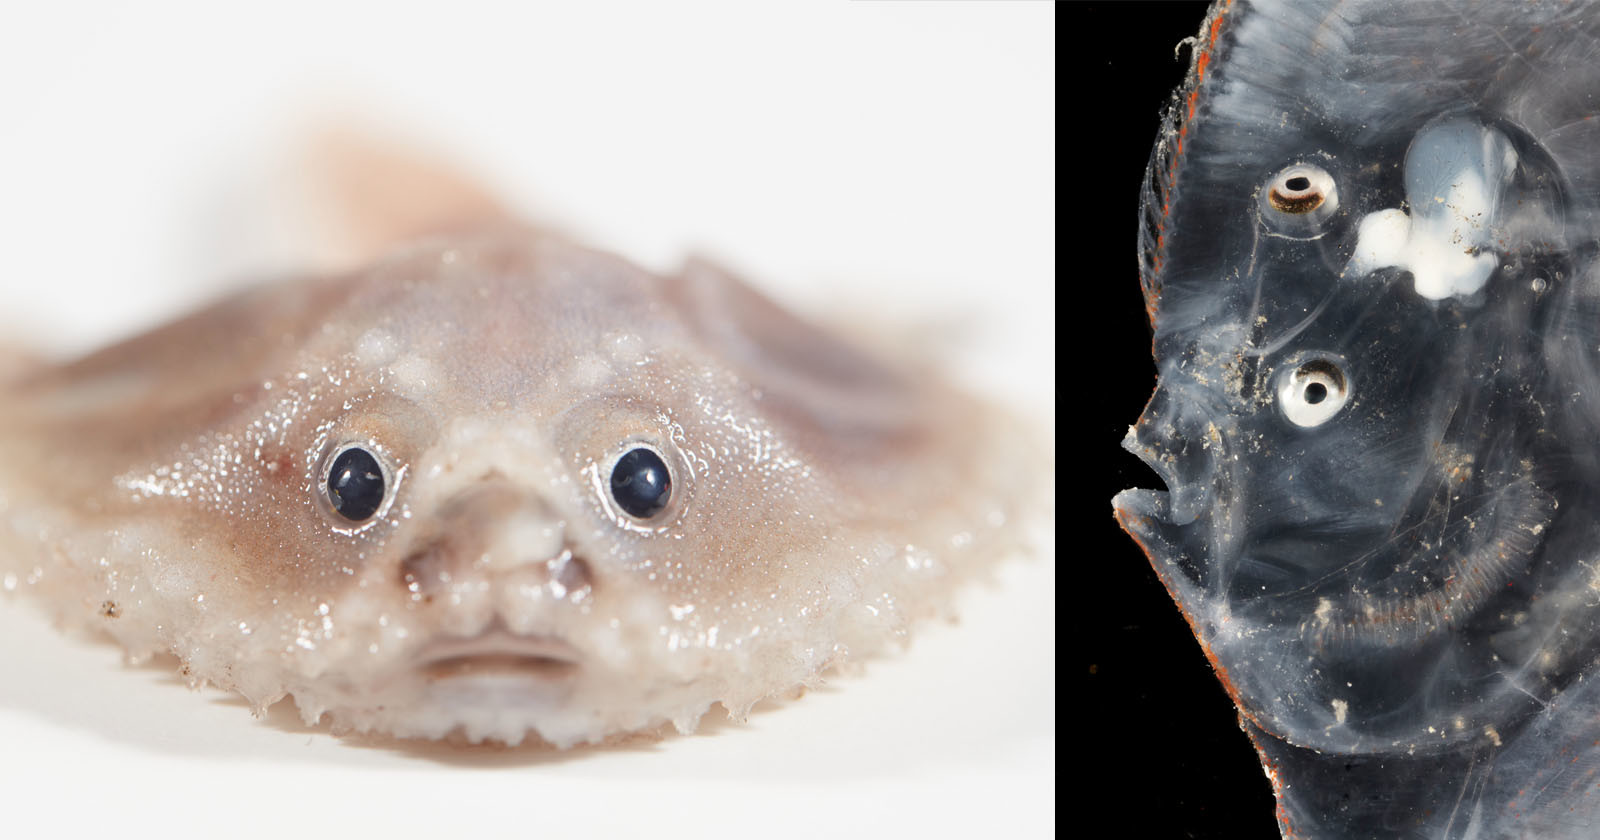 Photos of Newly Discovered Deep-Sea Creatures Living in the Remote Ocean